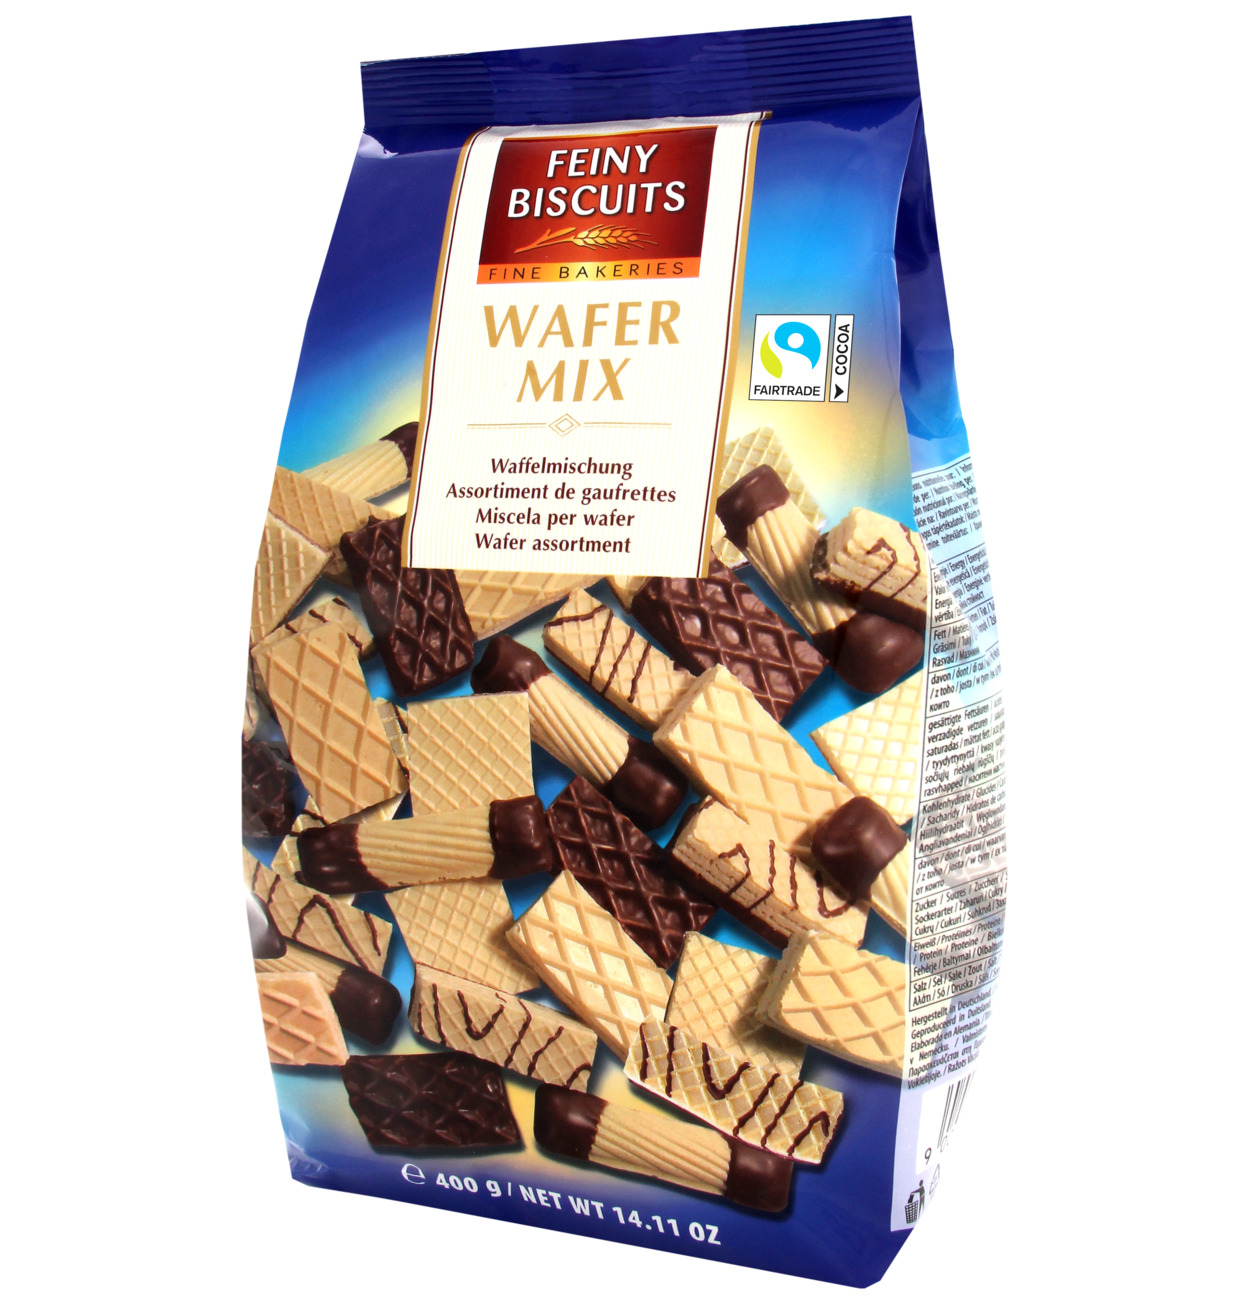 Feiny Biscuits  Wafer Mix 400g